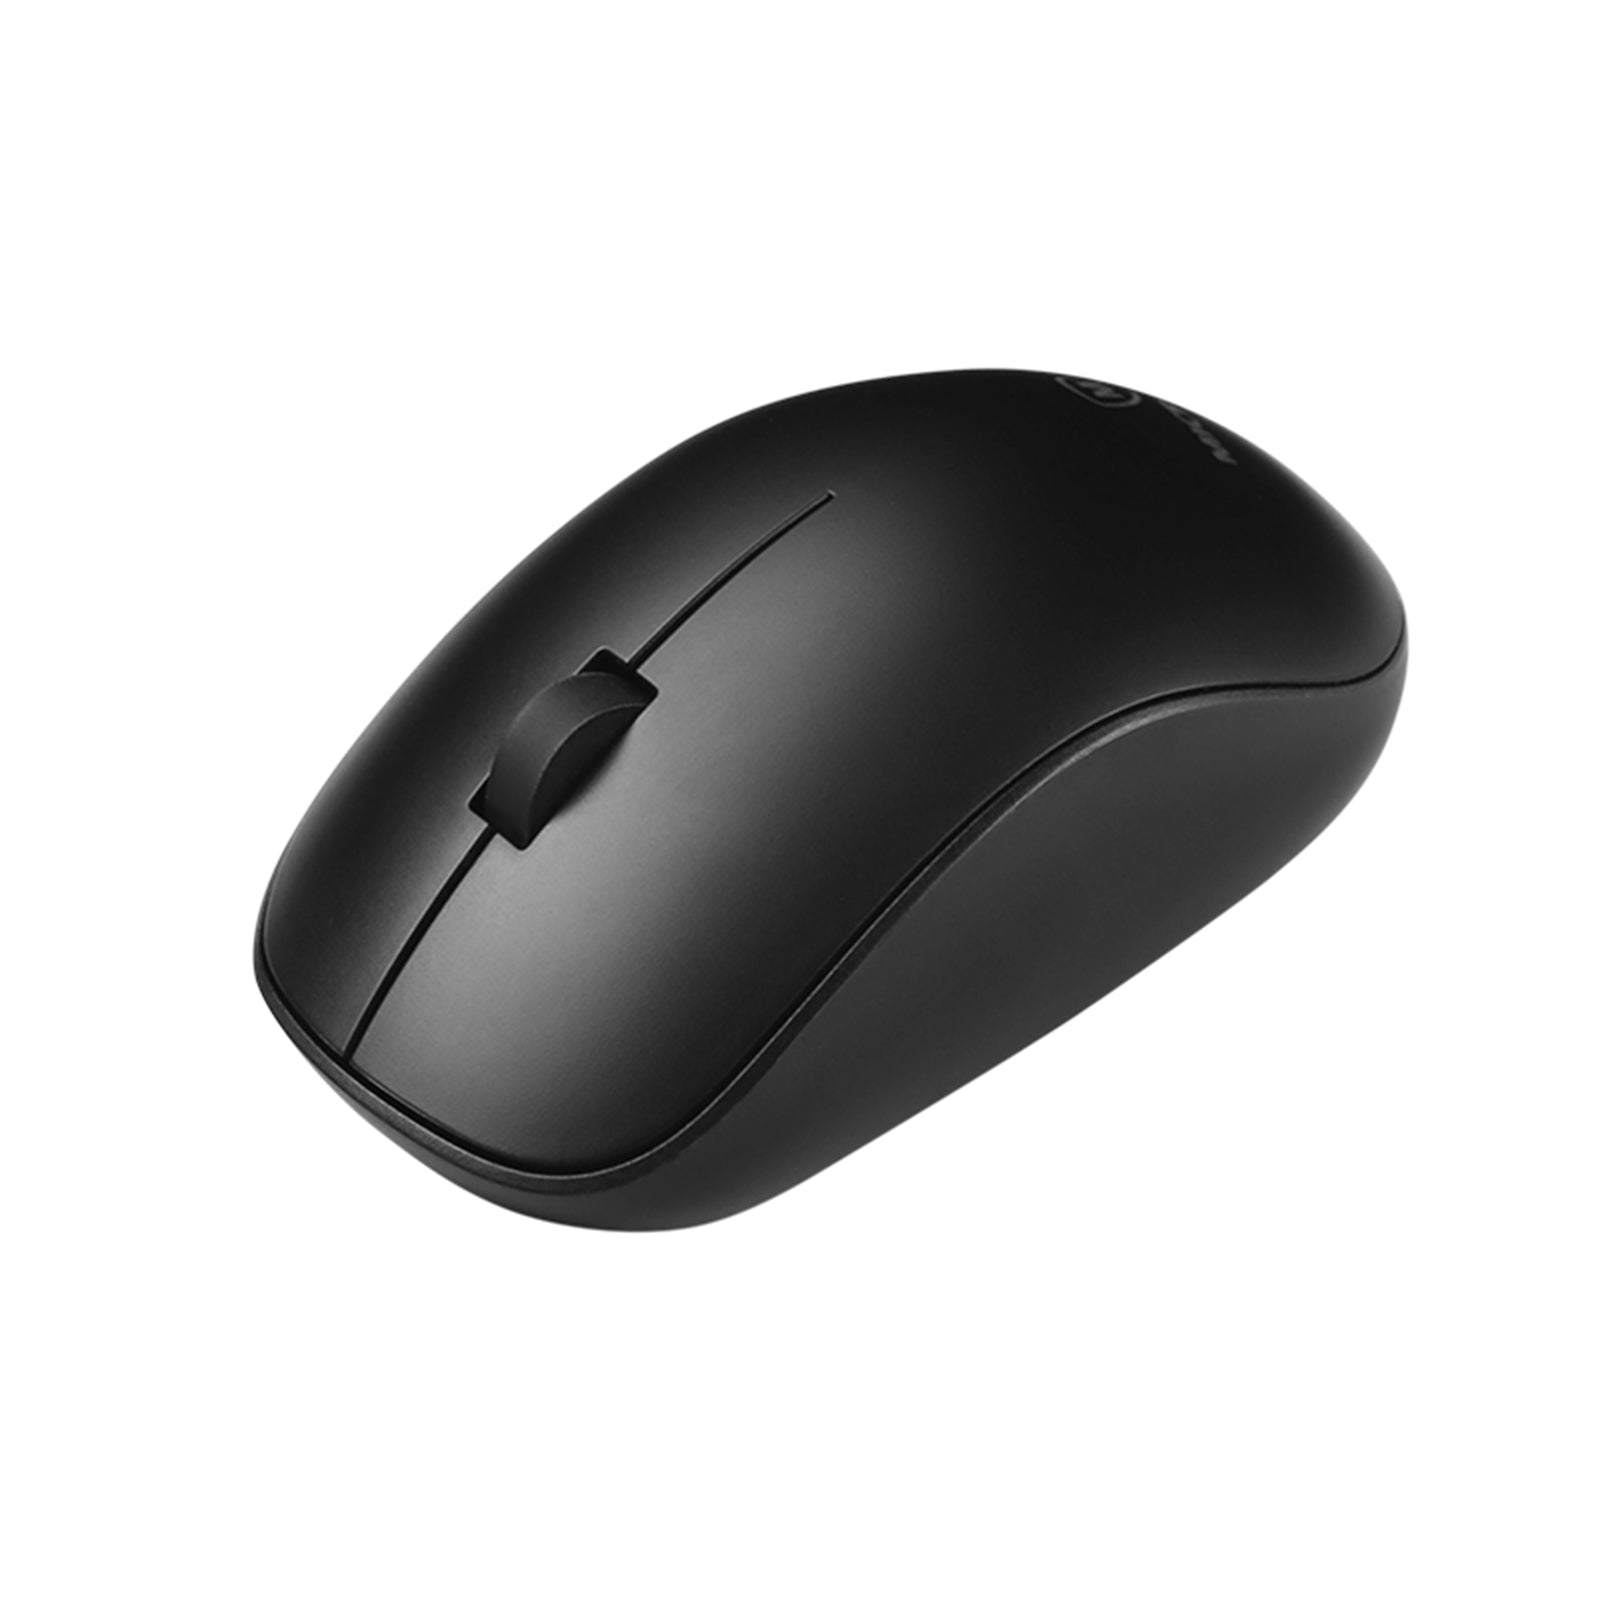 2.4G Wireless Mouse USB Receiver-(Black)